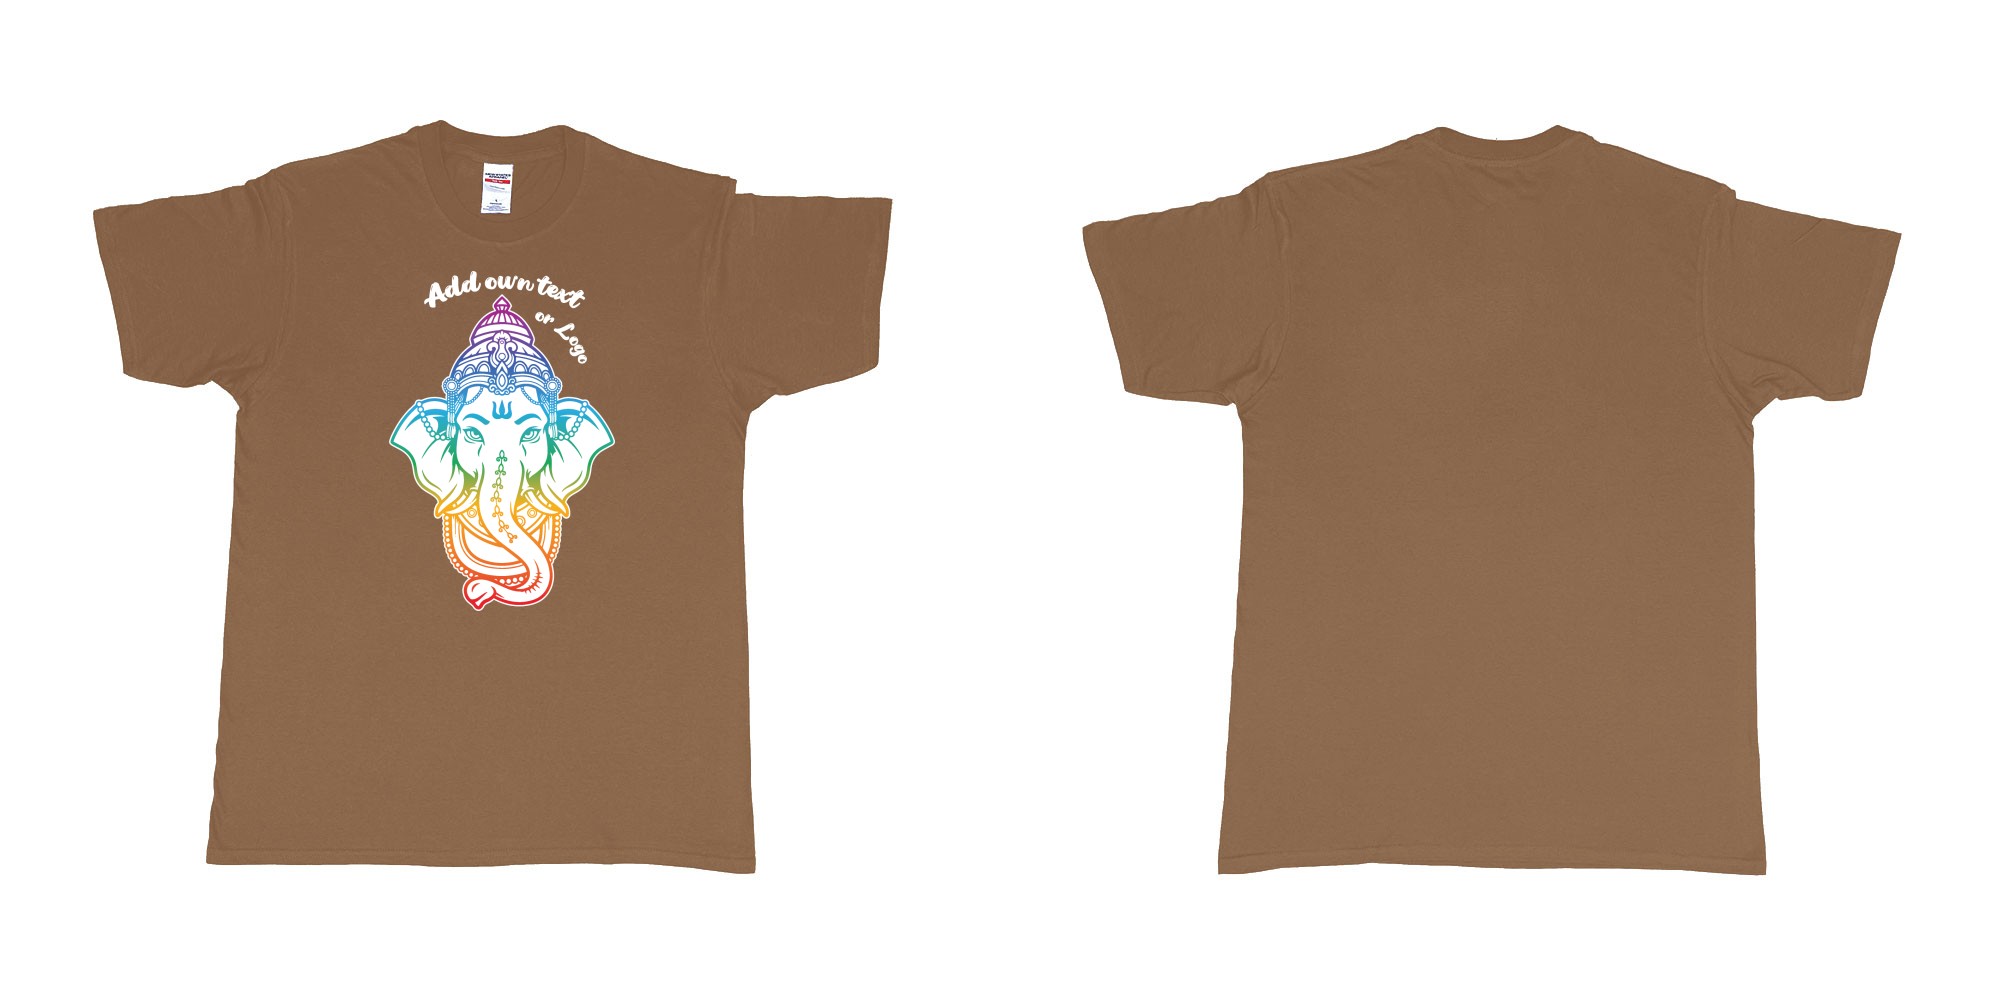 Custom tshirt design ganesha rainbow custom printing in fabric color chestnut choice your own text made in Bali by The Pirate Way